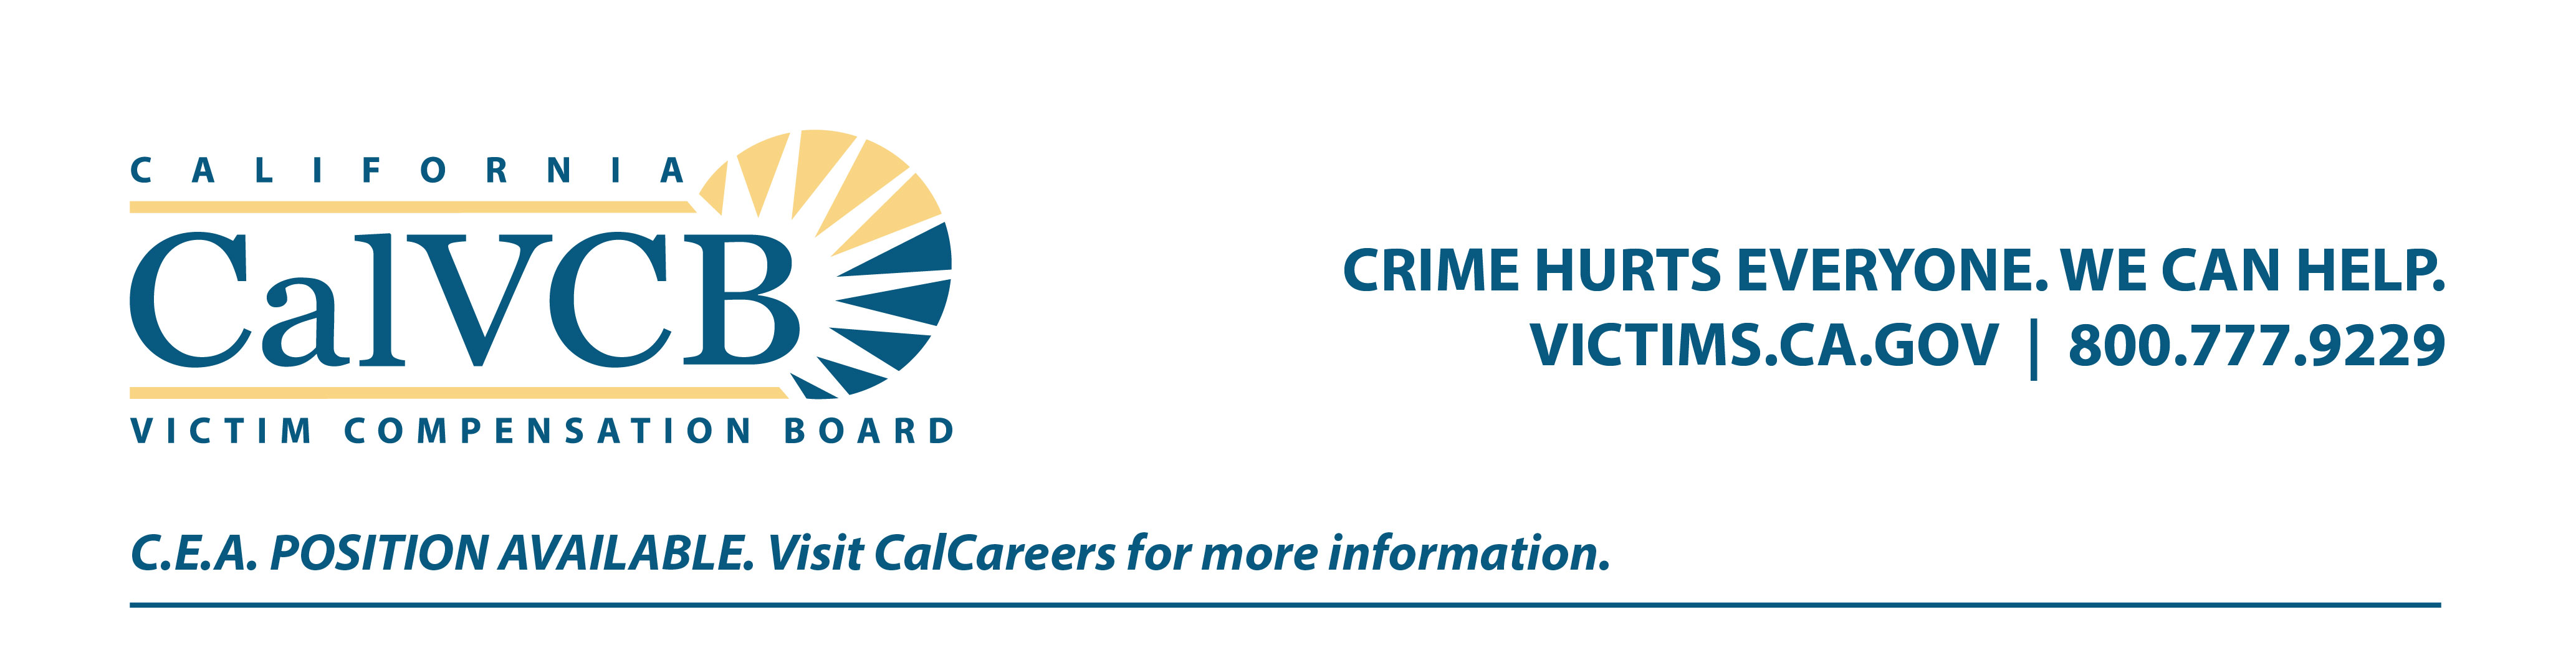 California Victim Compensation Board. Crime hurts everyone, we can help. Victims.ca.gov. Currently hiring C.E.A. Please visit CalCareers for additional information.